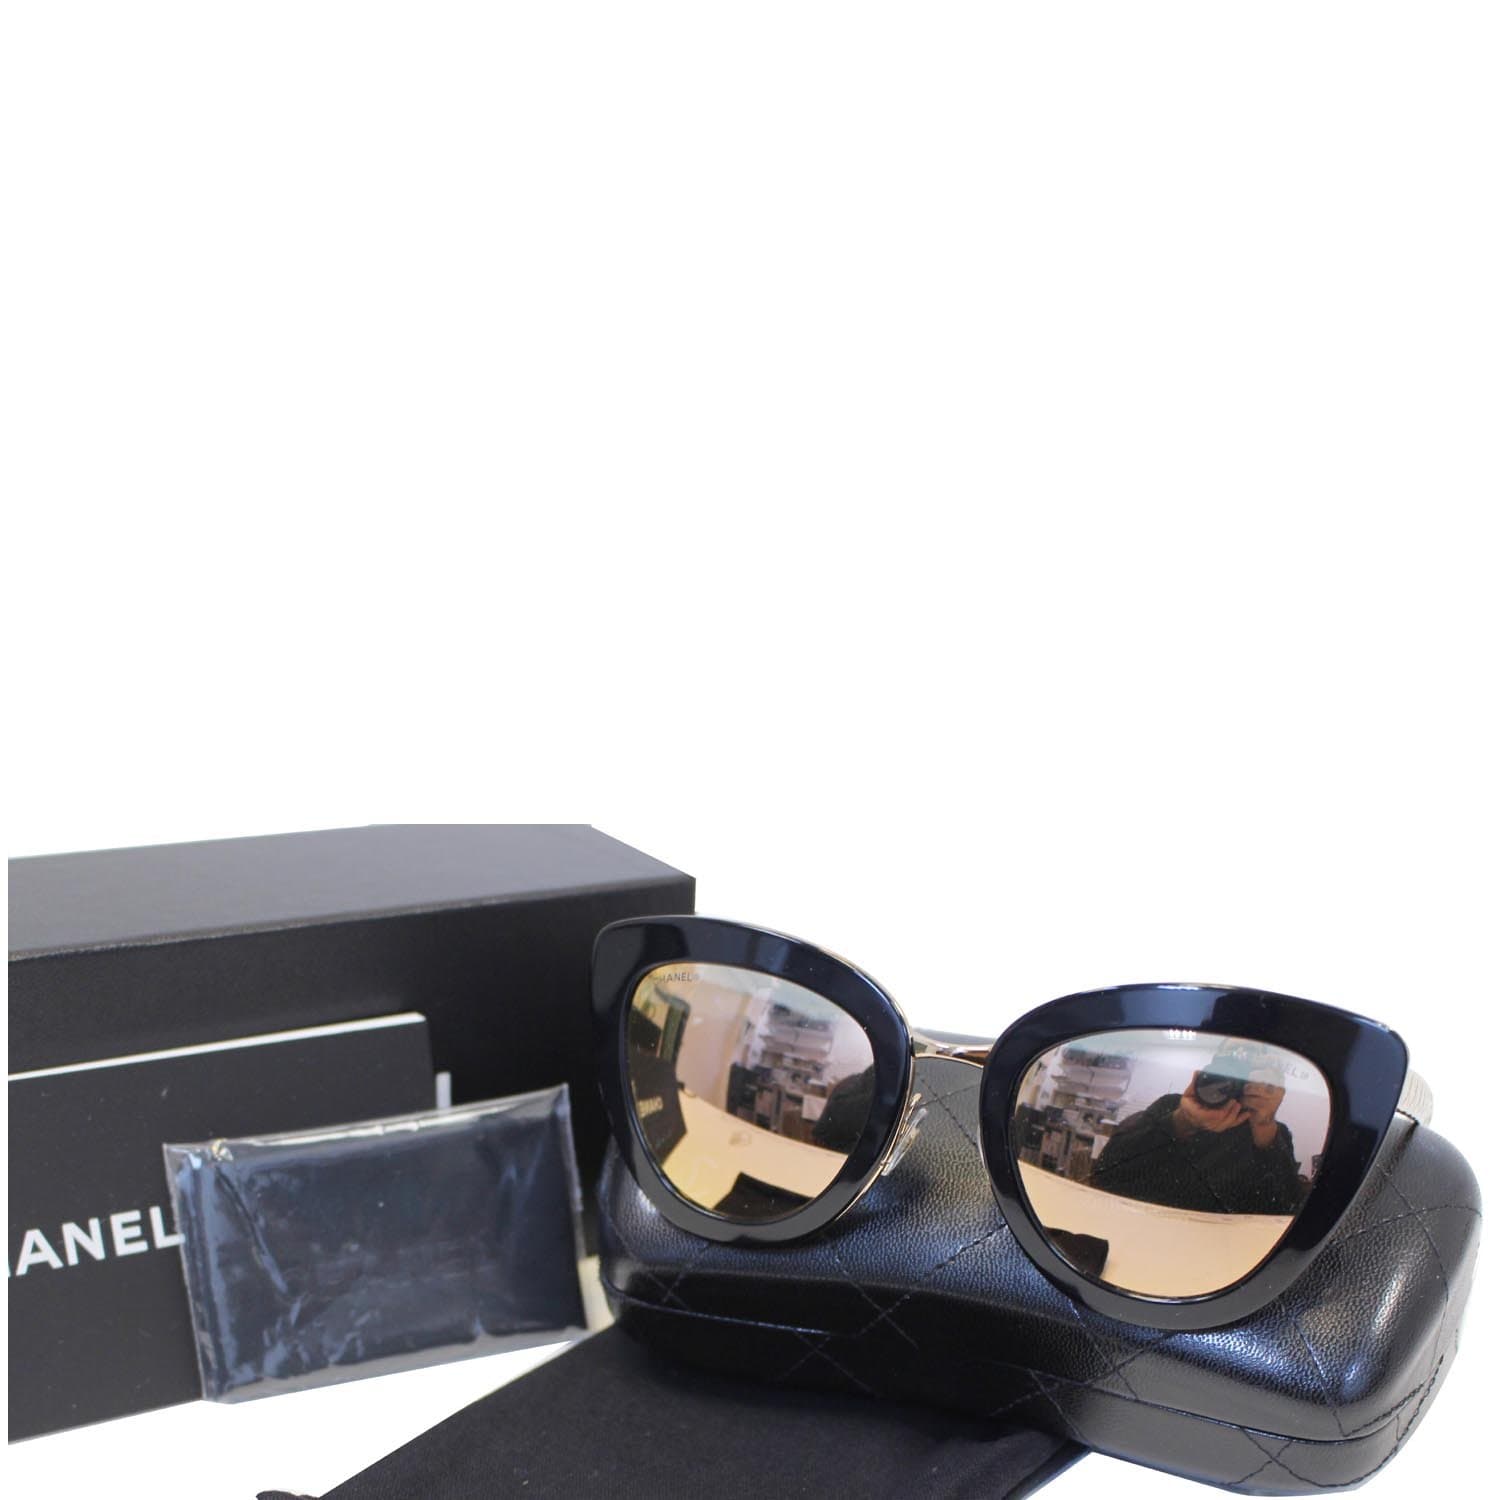 Chanel Black and Gold Chain Cat Eye Sunglasses Chanel | The Luxury Closet